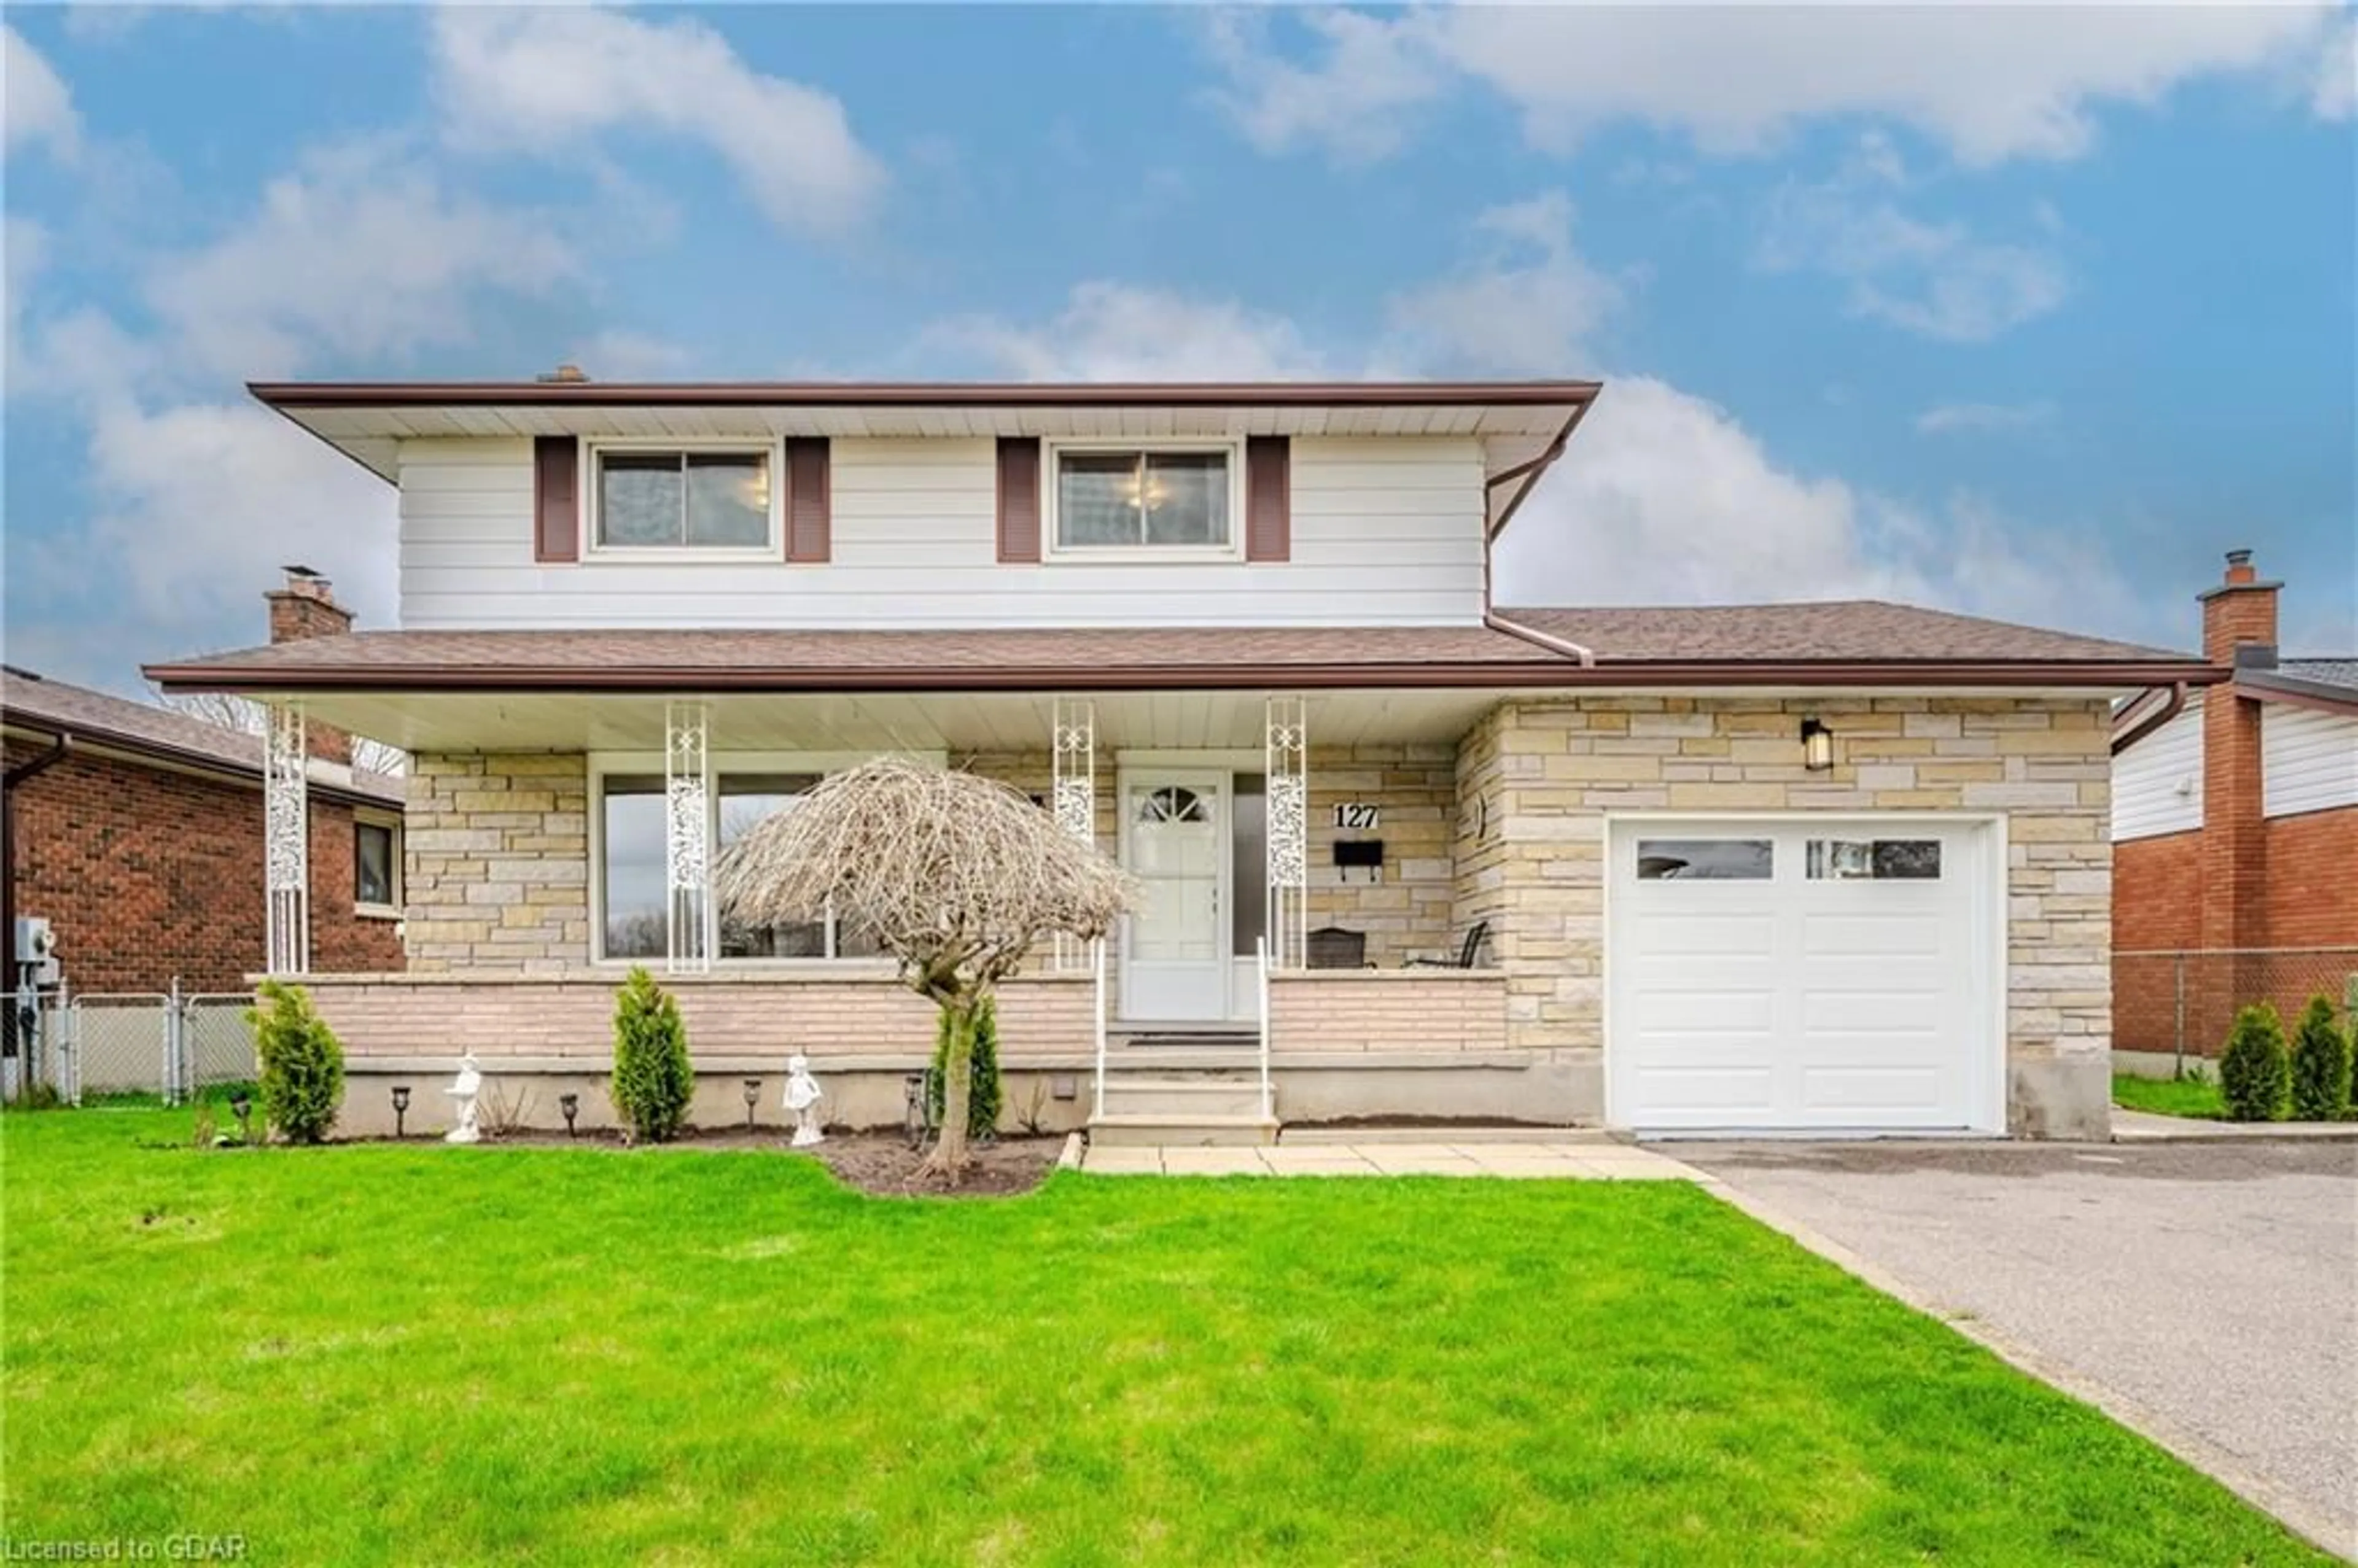 Home with brick exterior material for 127 Applewood Cres, Guelph Ontario N1H 6B3